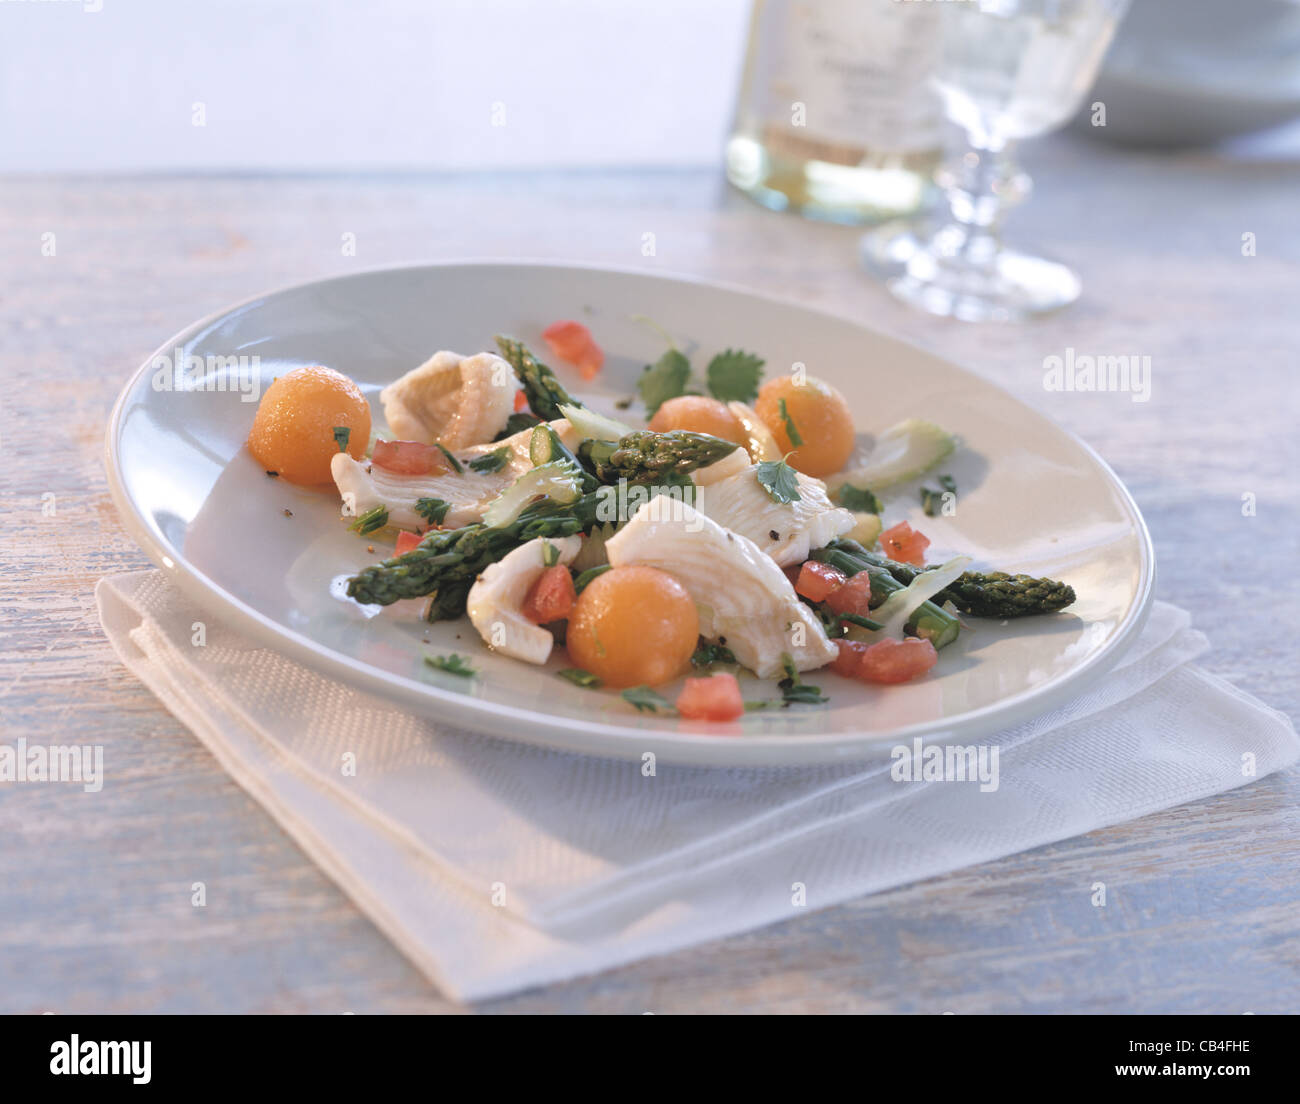 Salad of fish fillet with green asparagus Stock Photo